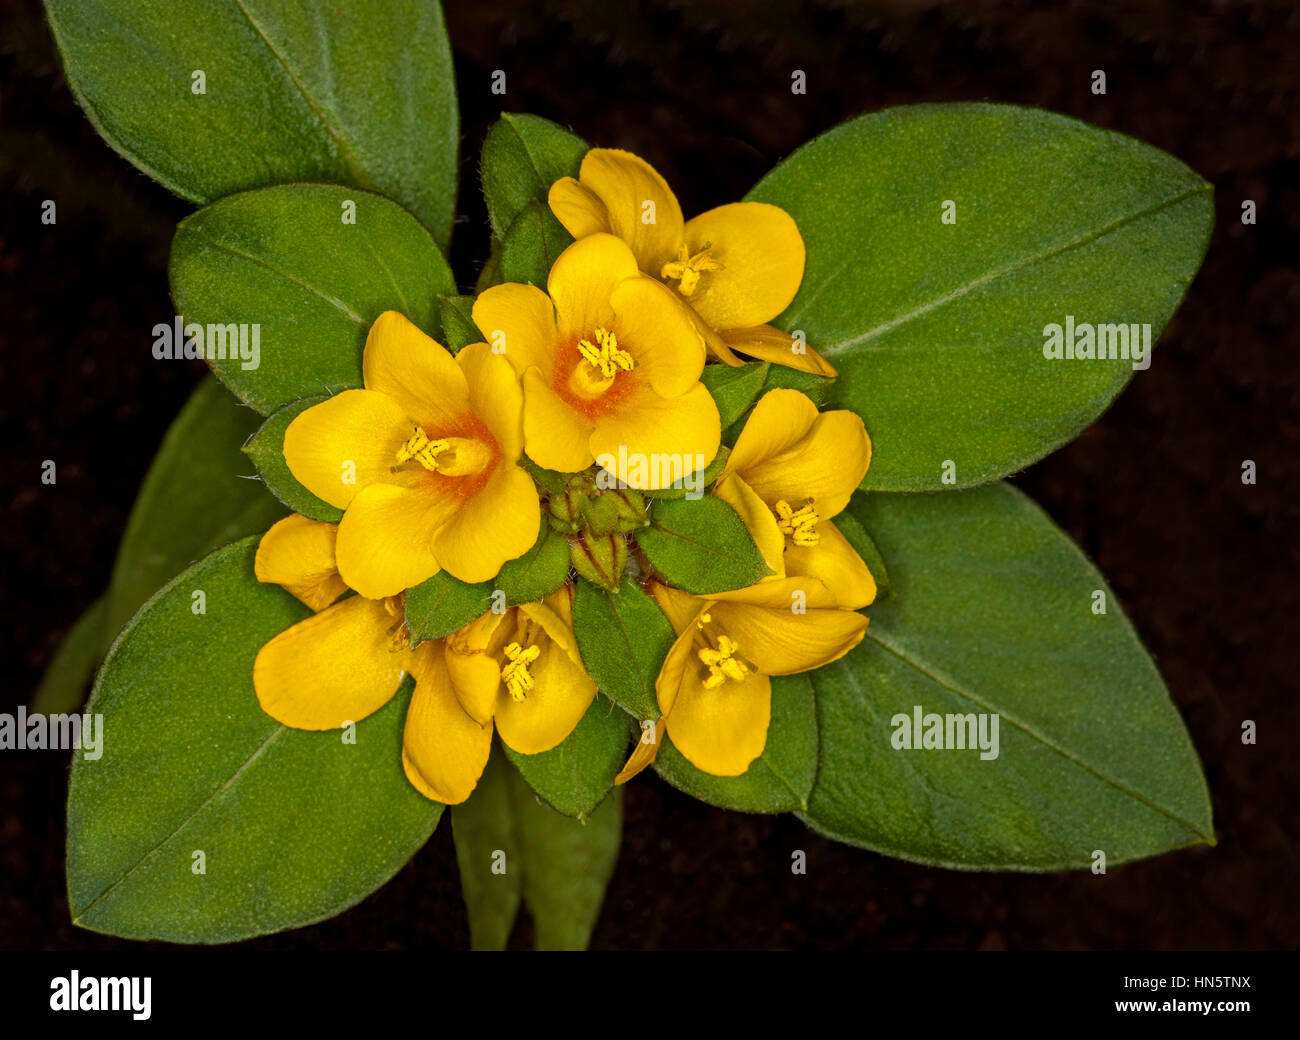 Cluster of golden yellow flowers of ground cover / rockery plant Lysimachia congestiflora surrounded by deep green foliage on black background. Stock Photo